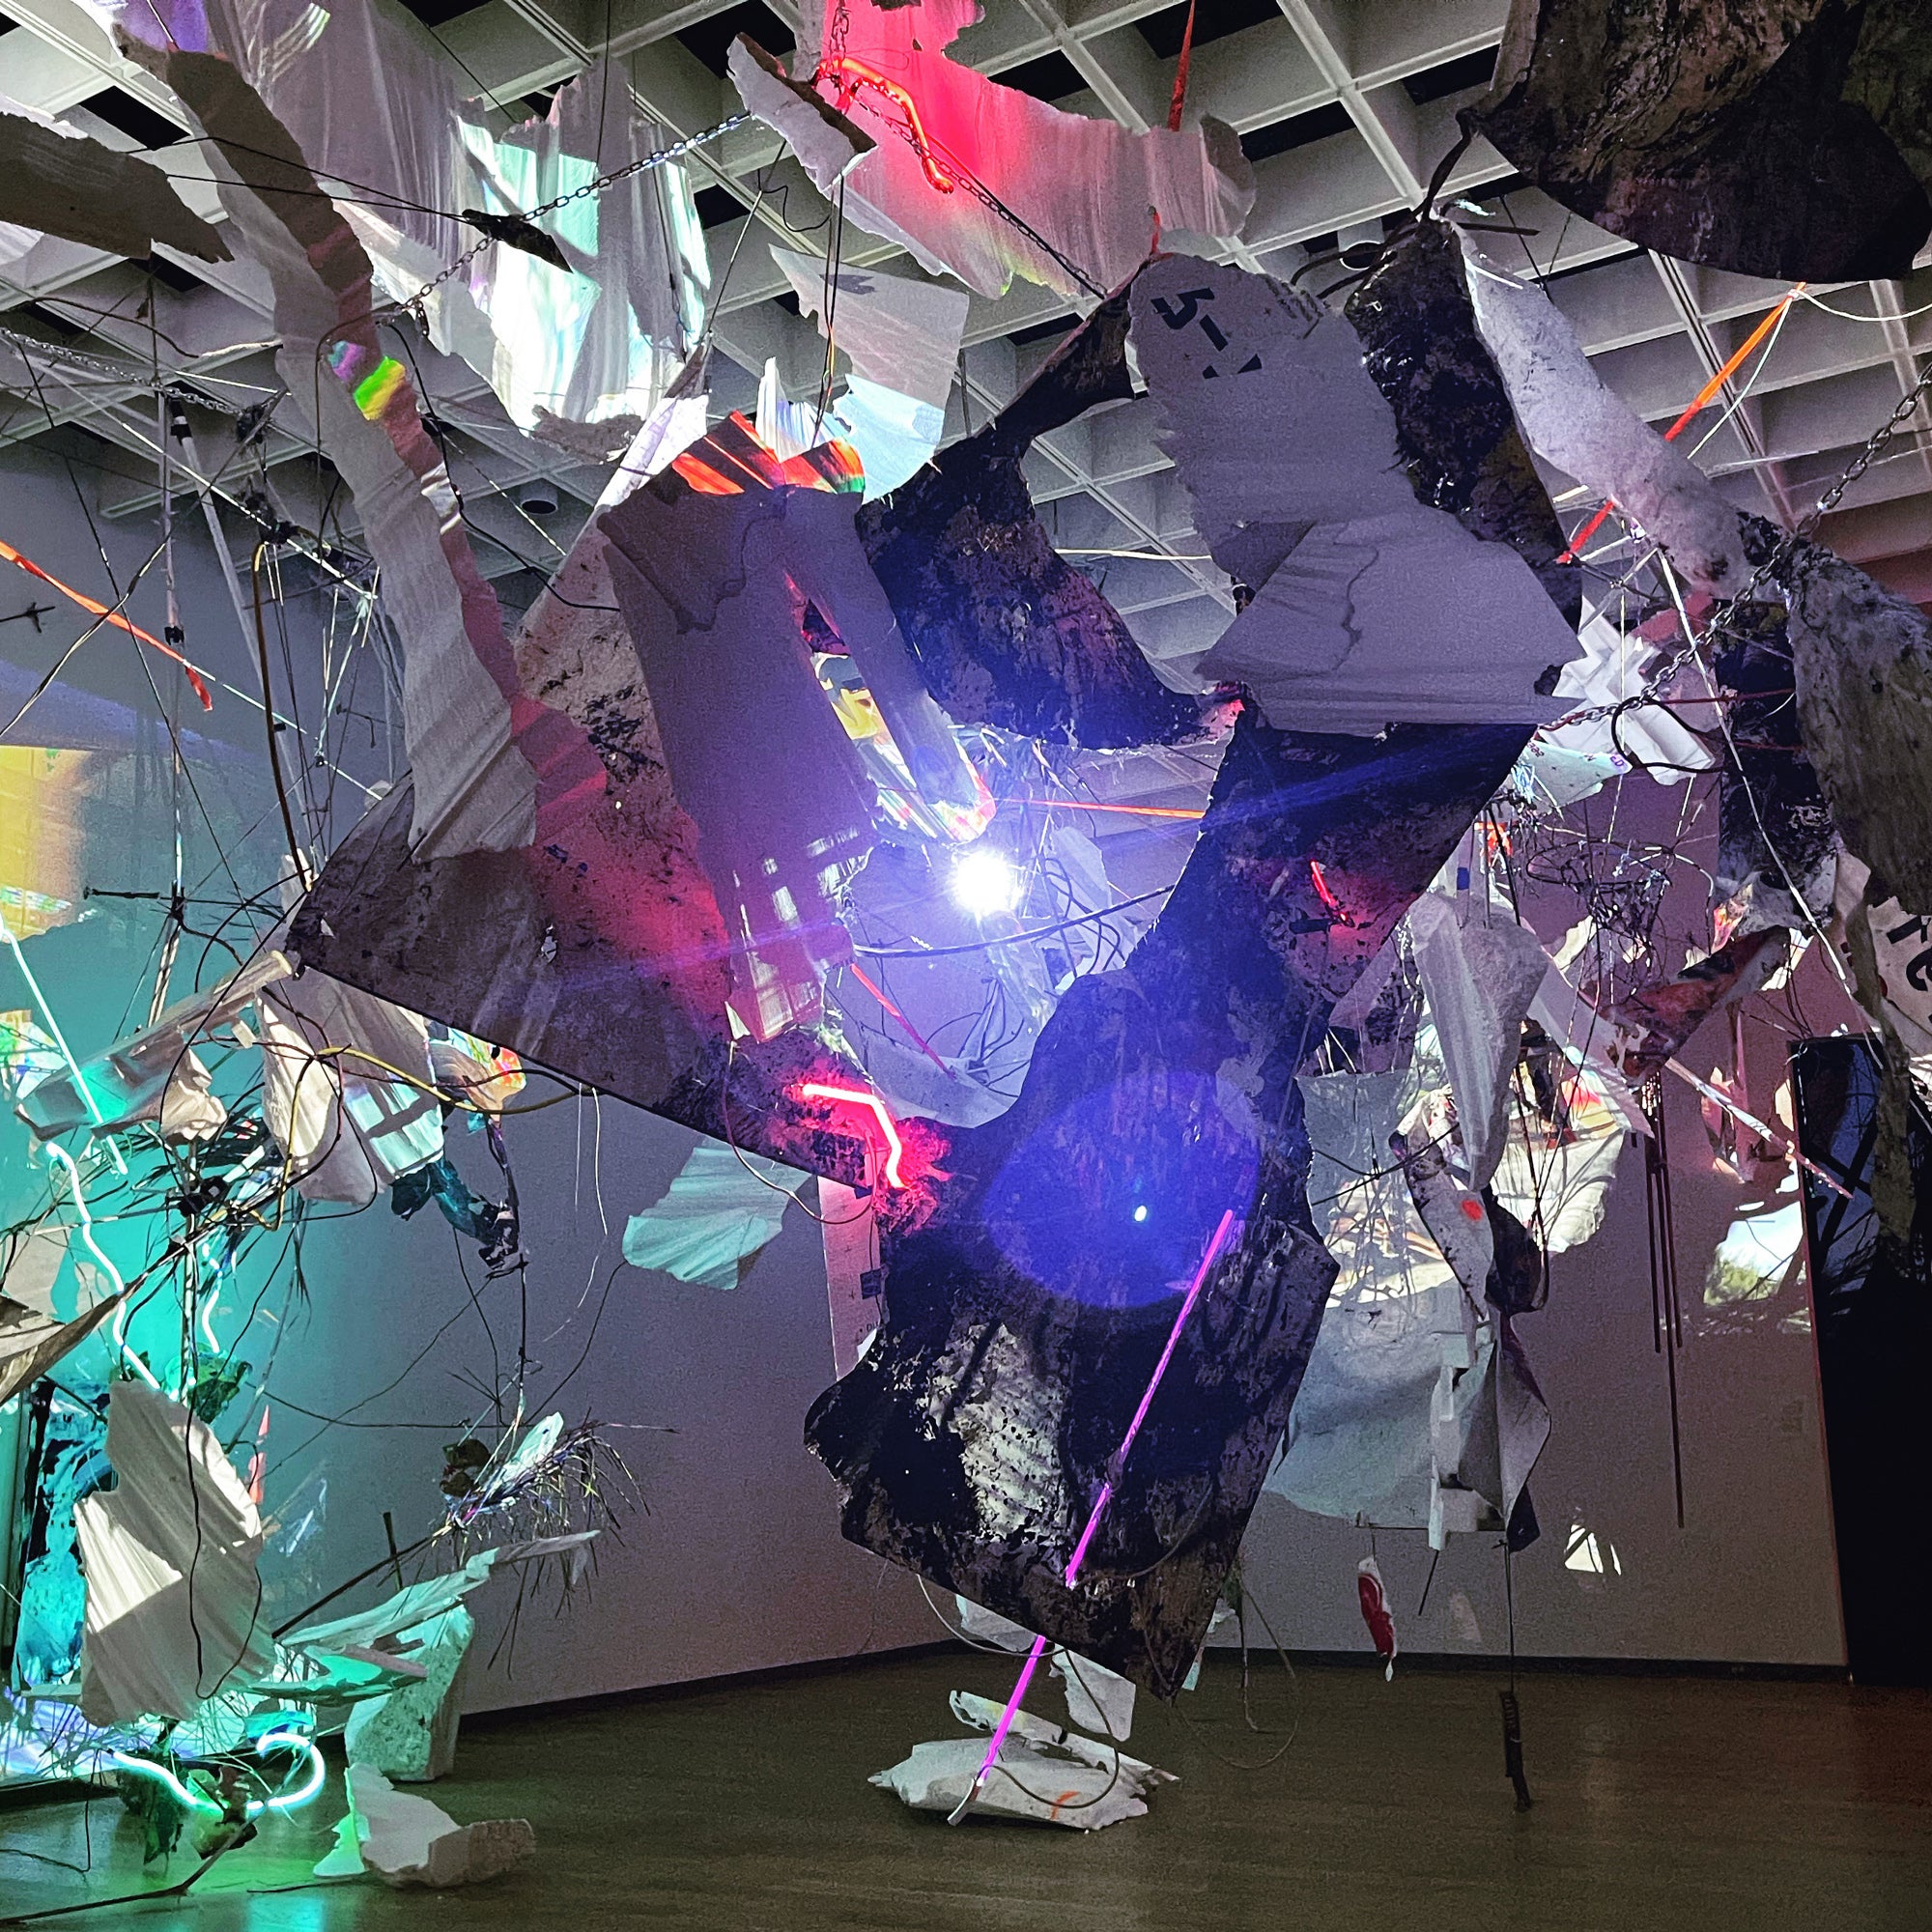 installation art made from discarded objects and video projection